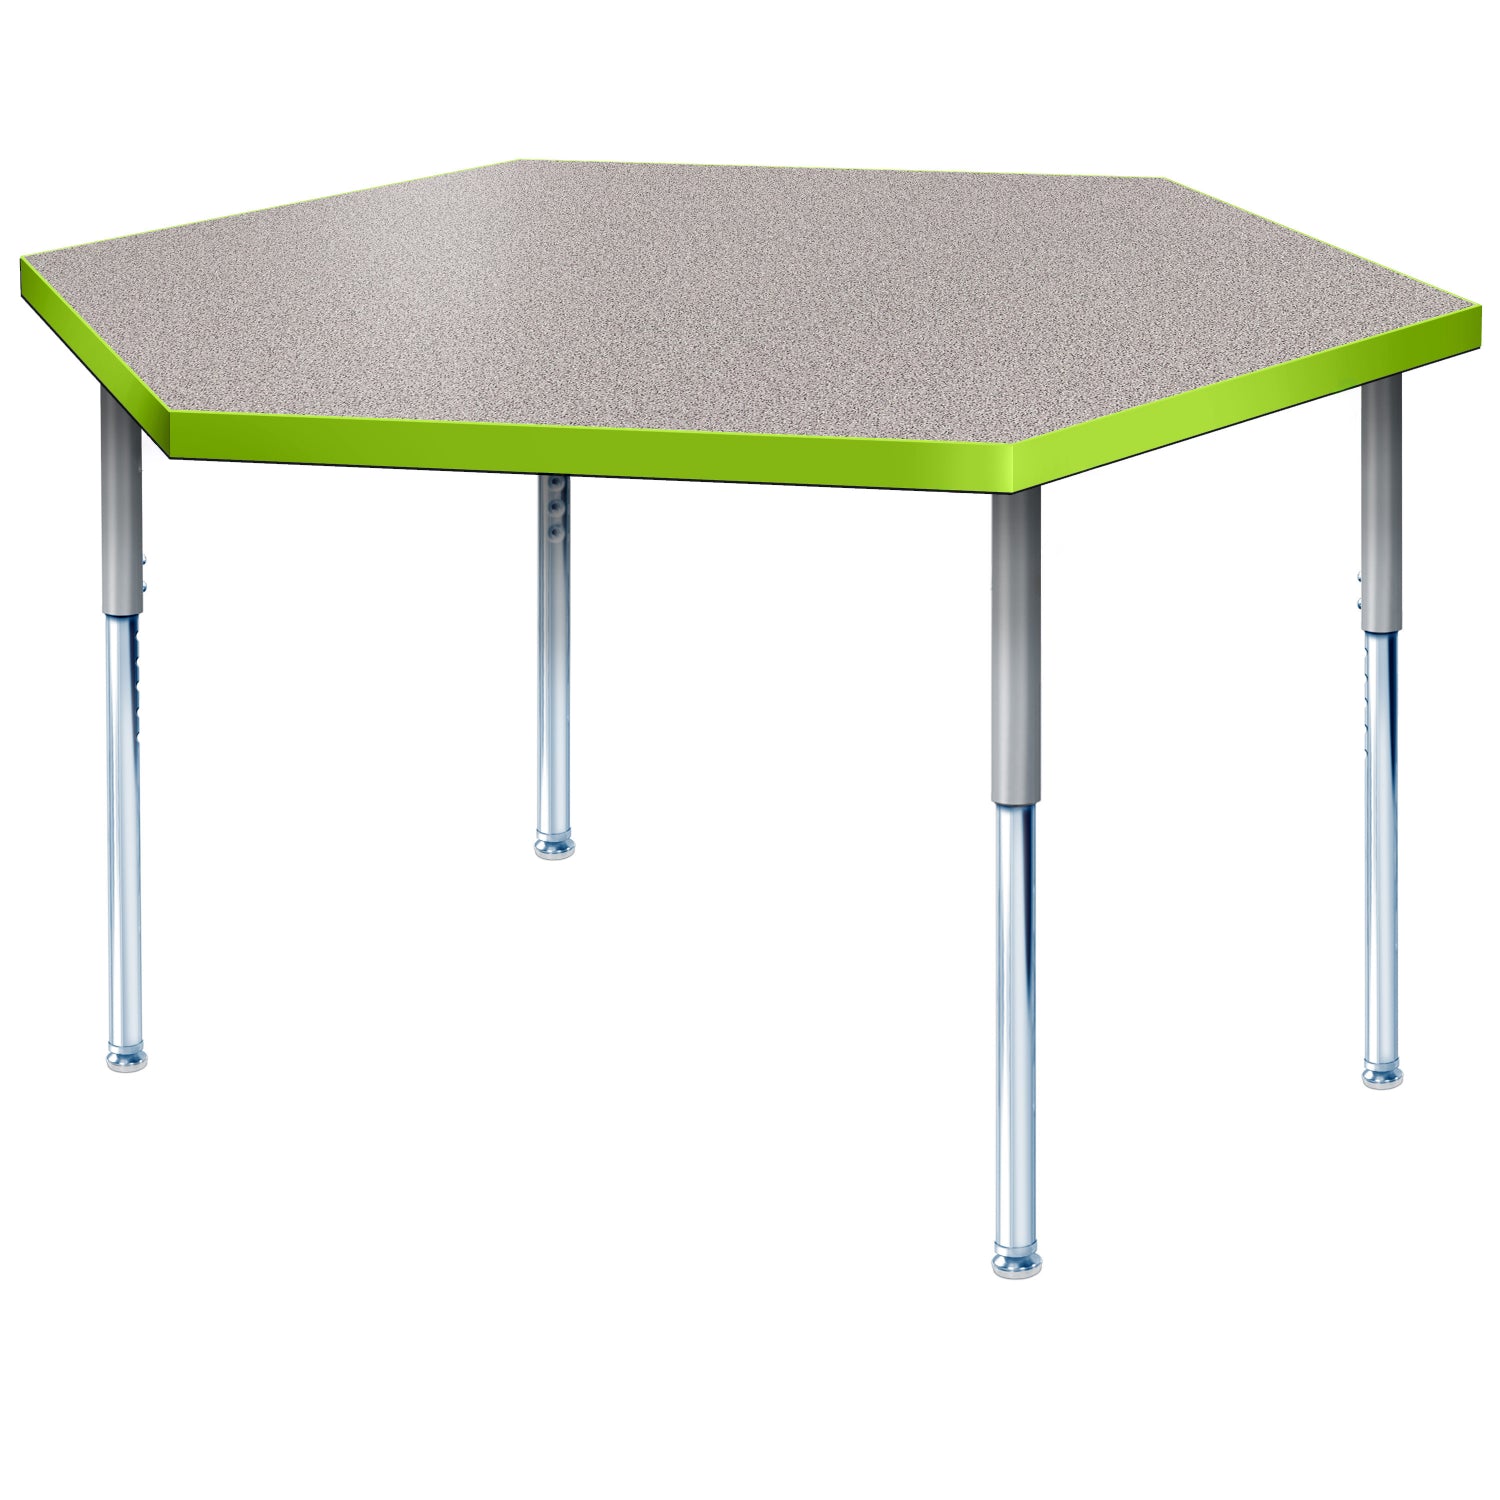 Modern Classic Series 48" Hexagon Activity Table with High Pressure Laminate Top, Adjustable Height Legs